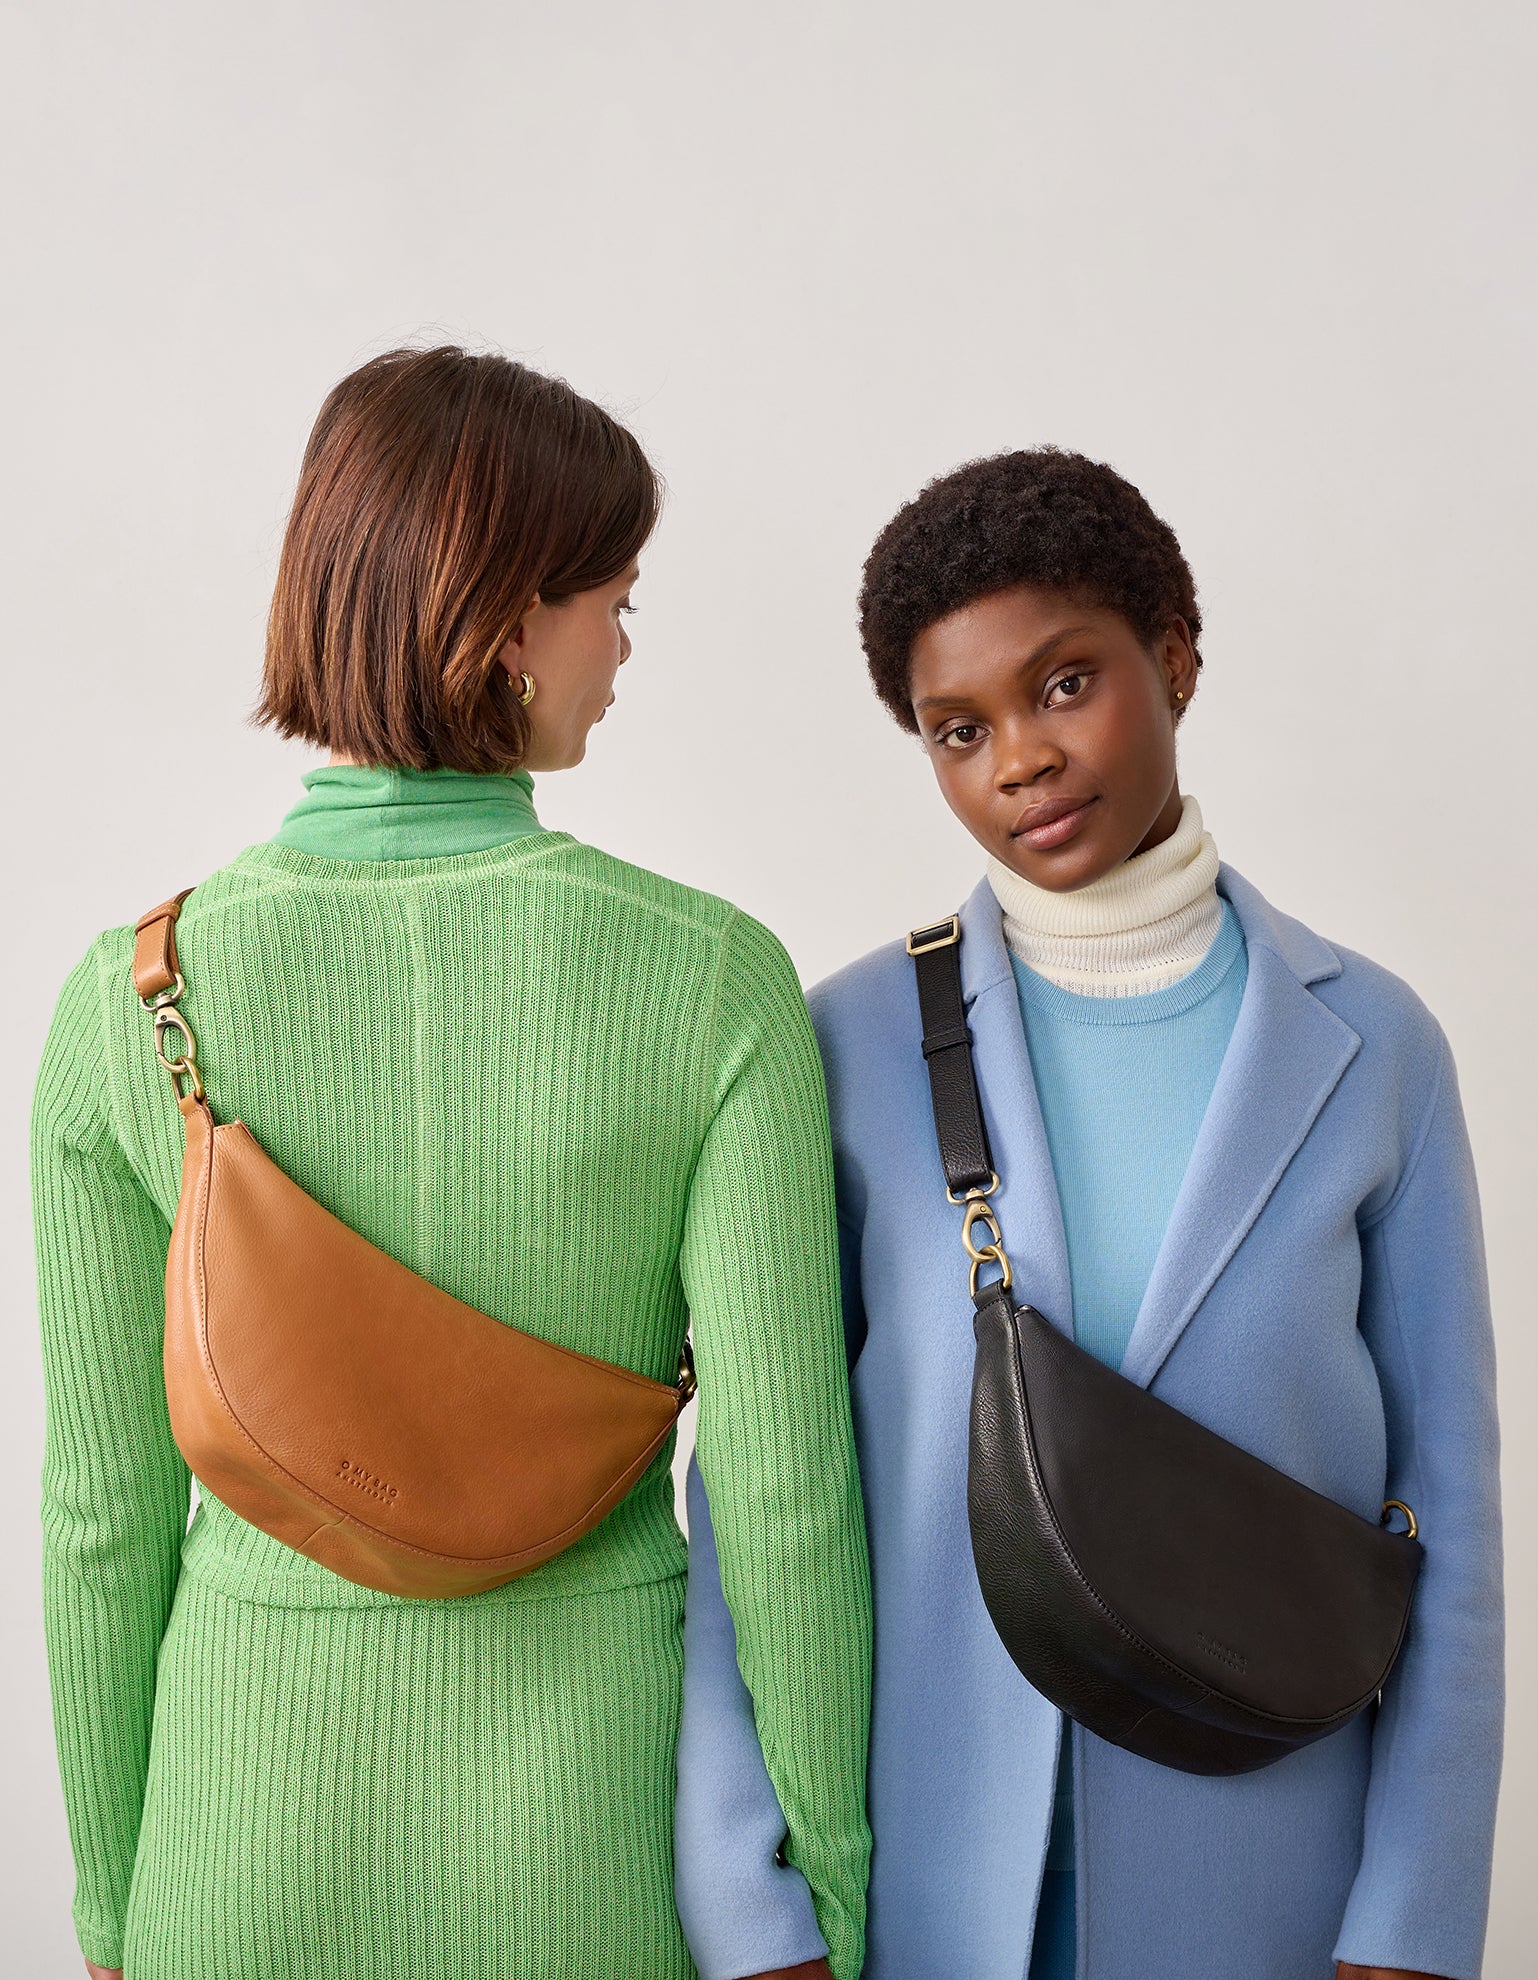 Crossbody Leo Bag - Campaign image with two models